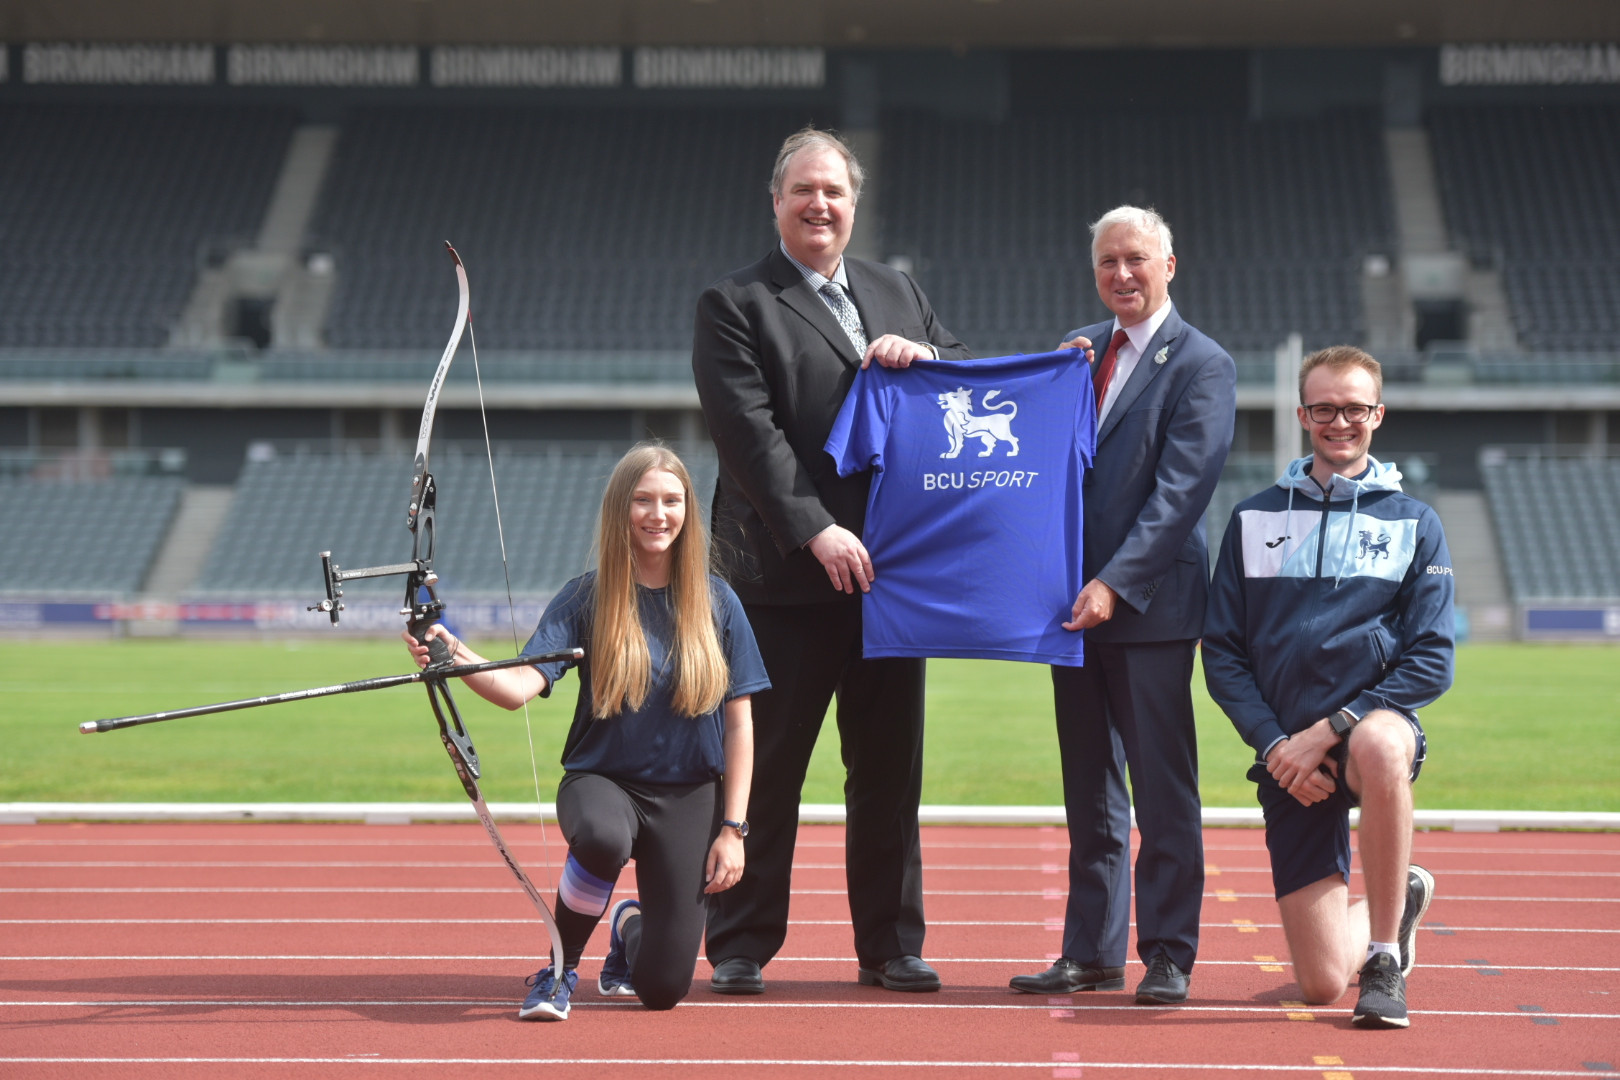 The Alexander Stadium will accomodate up to 1,000 Birmingham City University students after the 2022 Commonwealth Games to be held in the city ©Nick Robinson - Birmingham City University